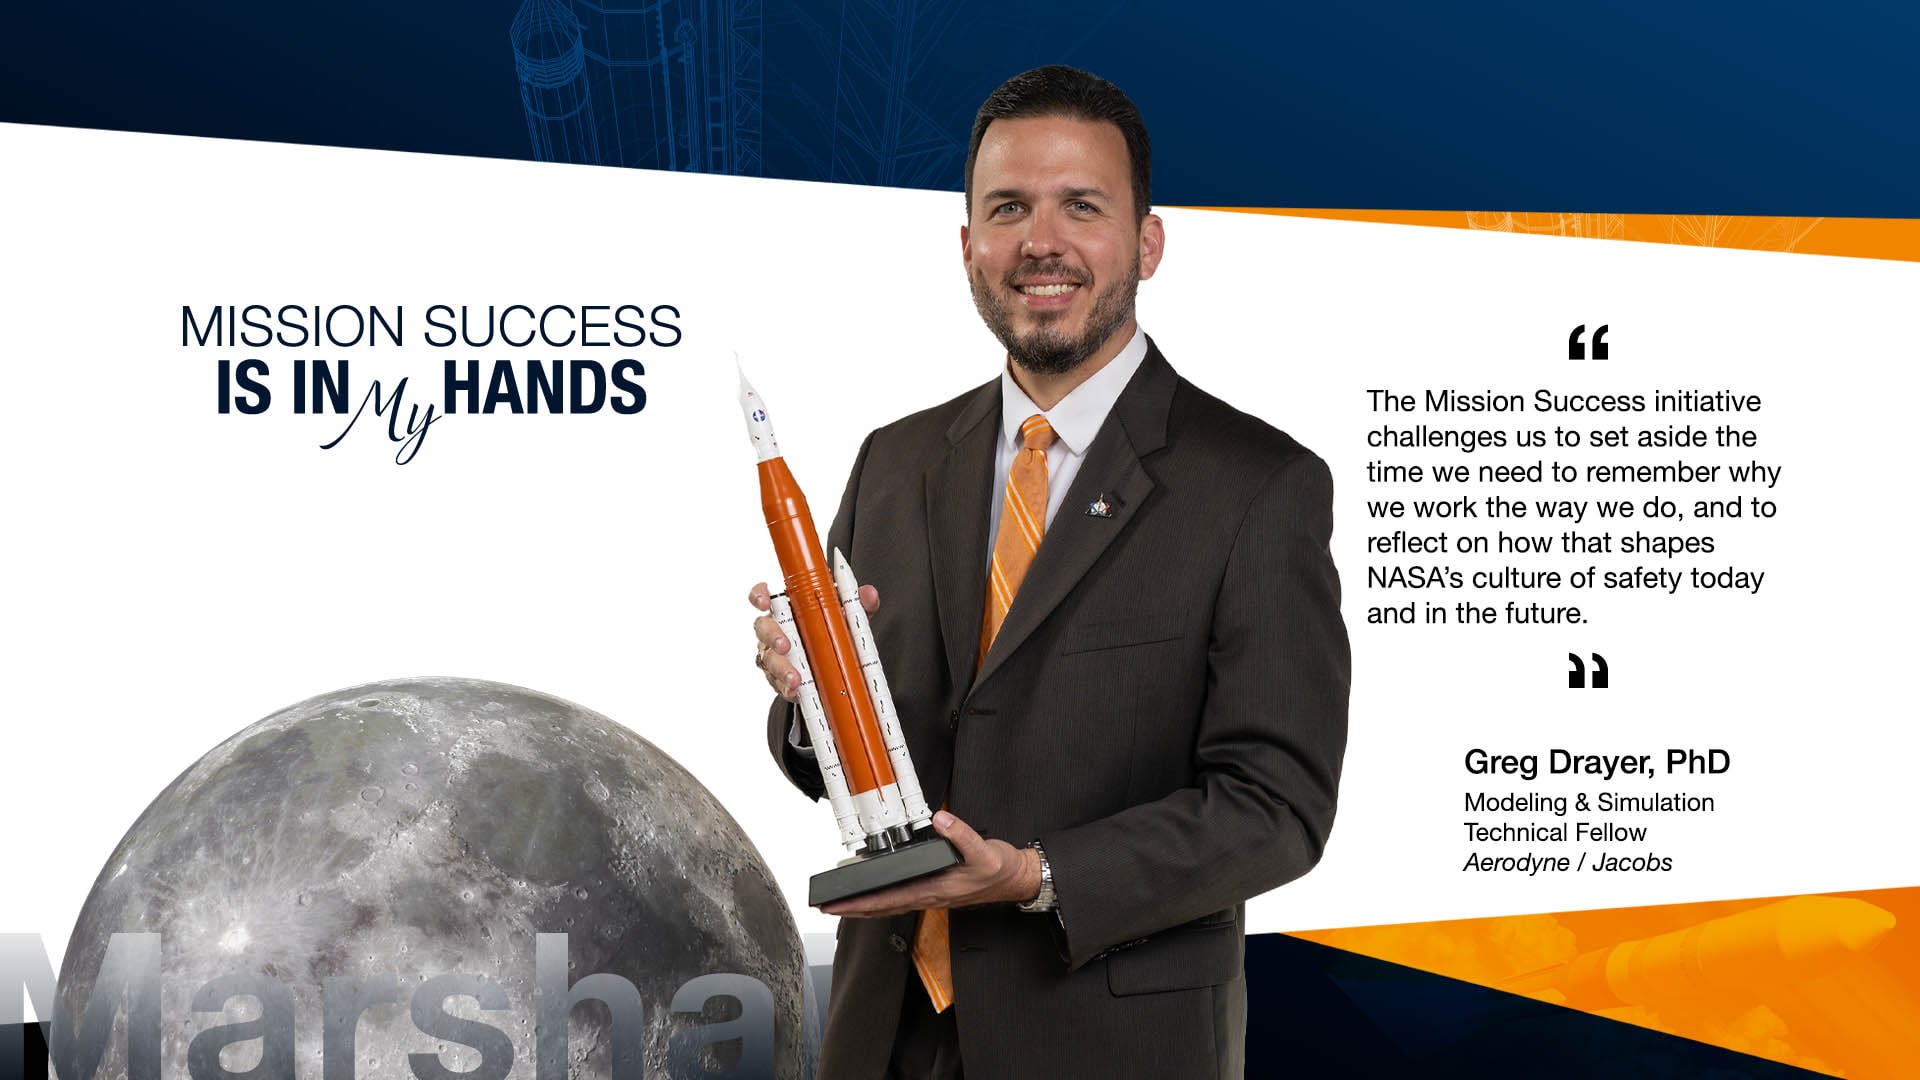 Greg Drayer is the JSEG (Jacobs Space Exploration Group) team lead for EV74, the Systems Analysis Branch, working at NASA’s Marshall Space Flight Center.